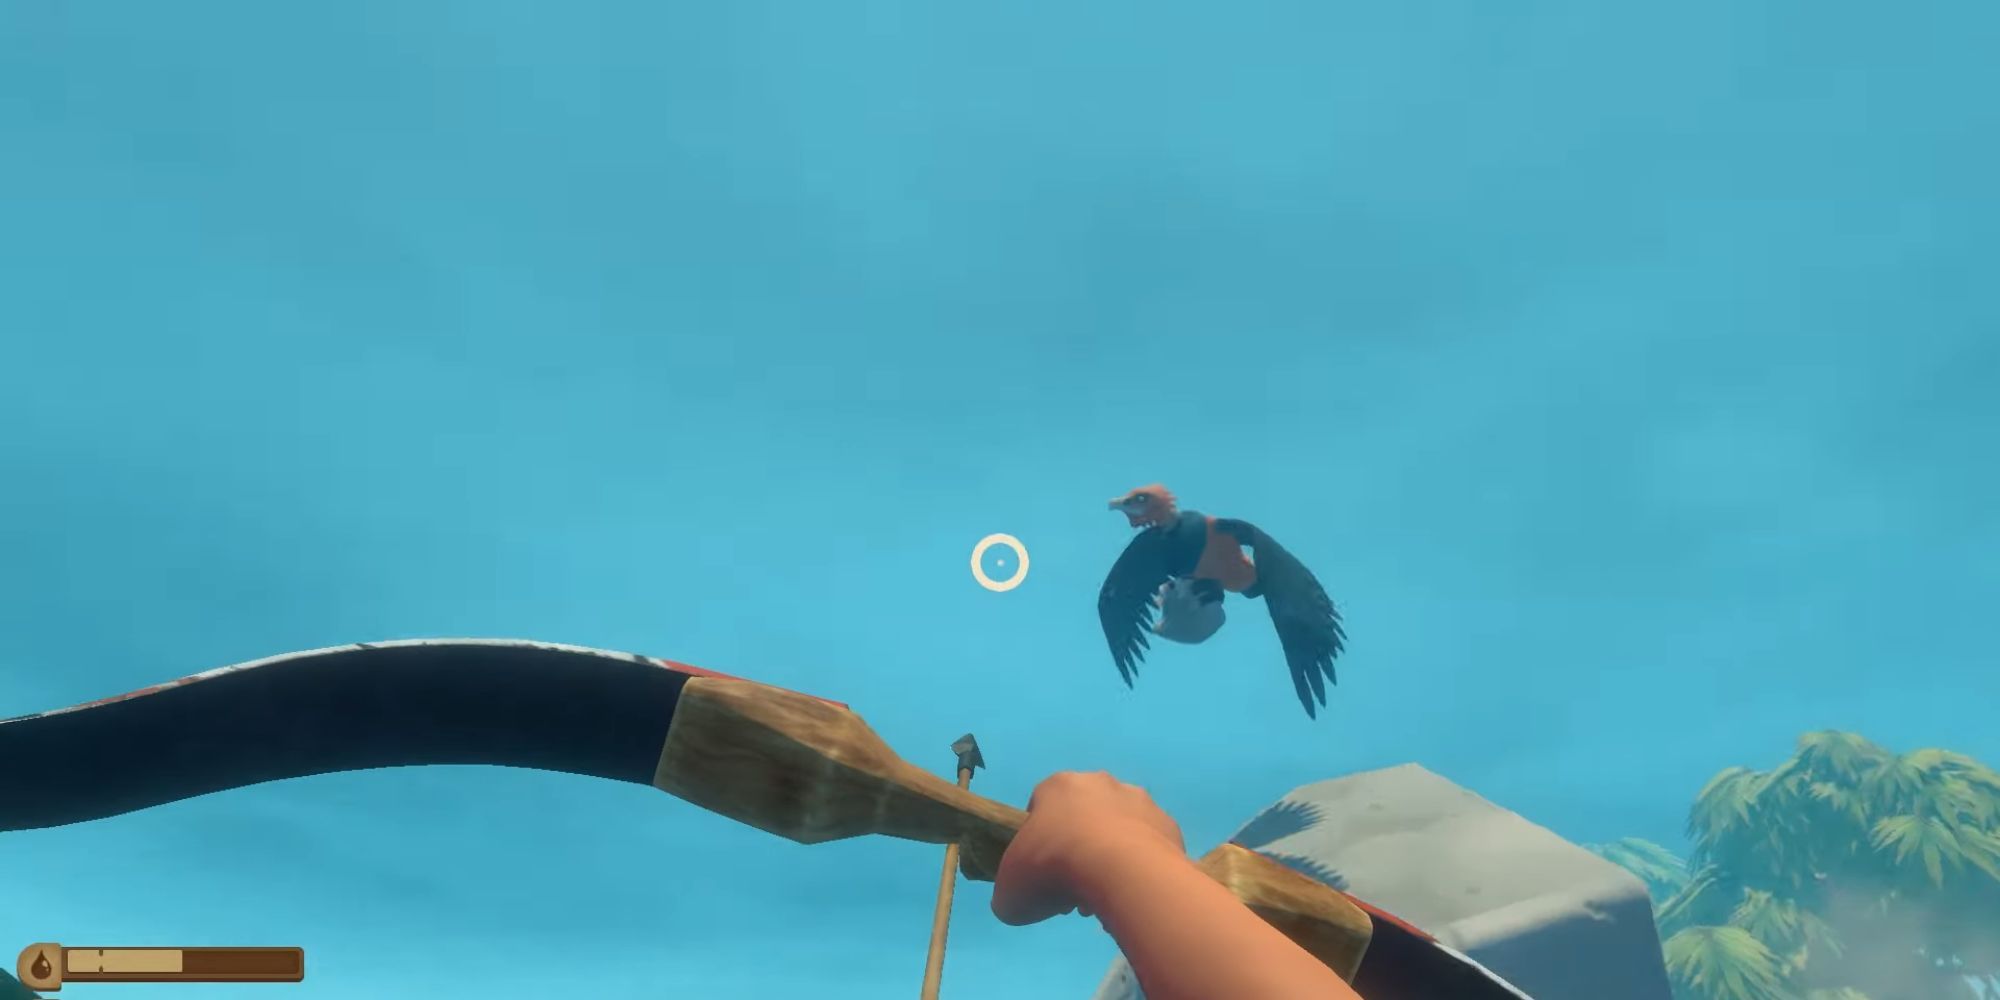 Player aims their bow and arrow at a Screecher that is flying with a rock in its talons